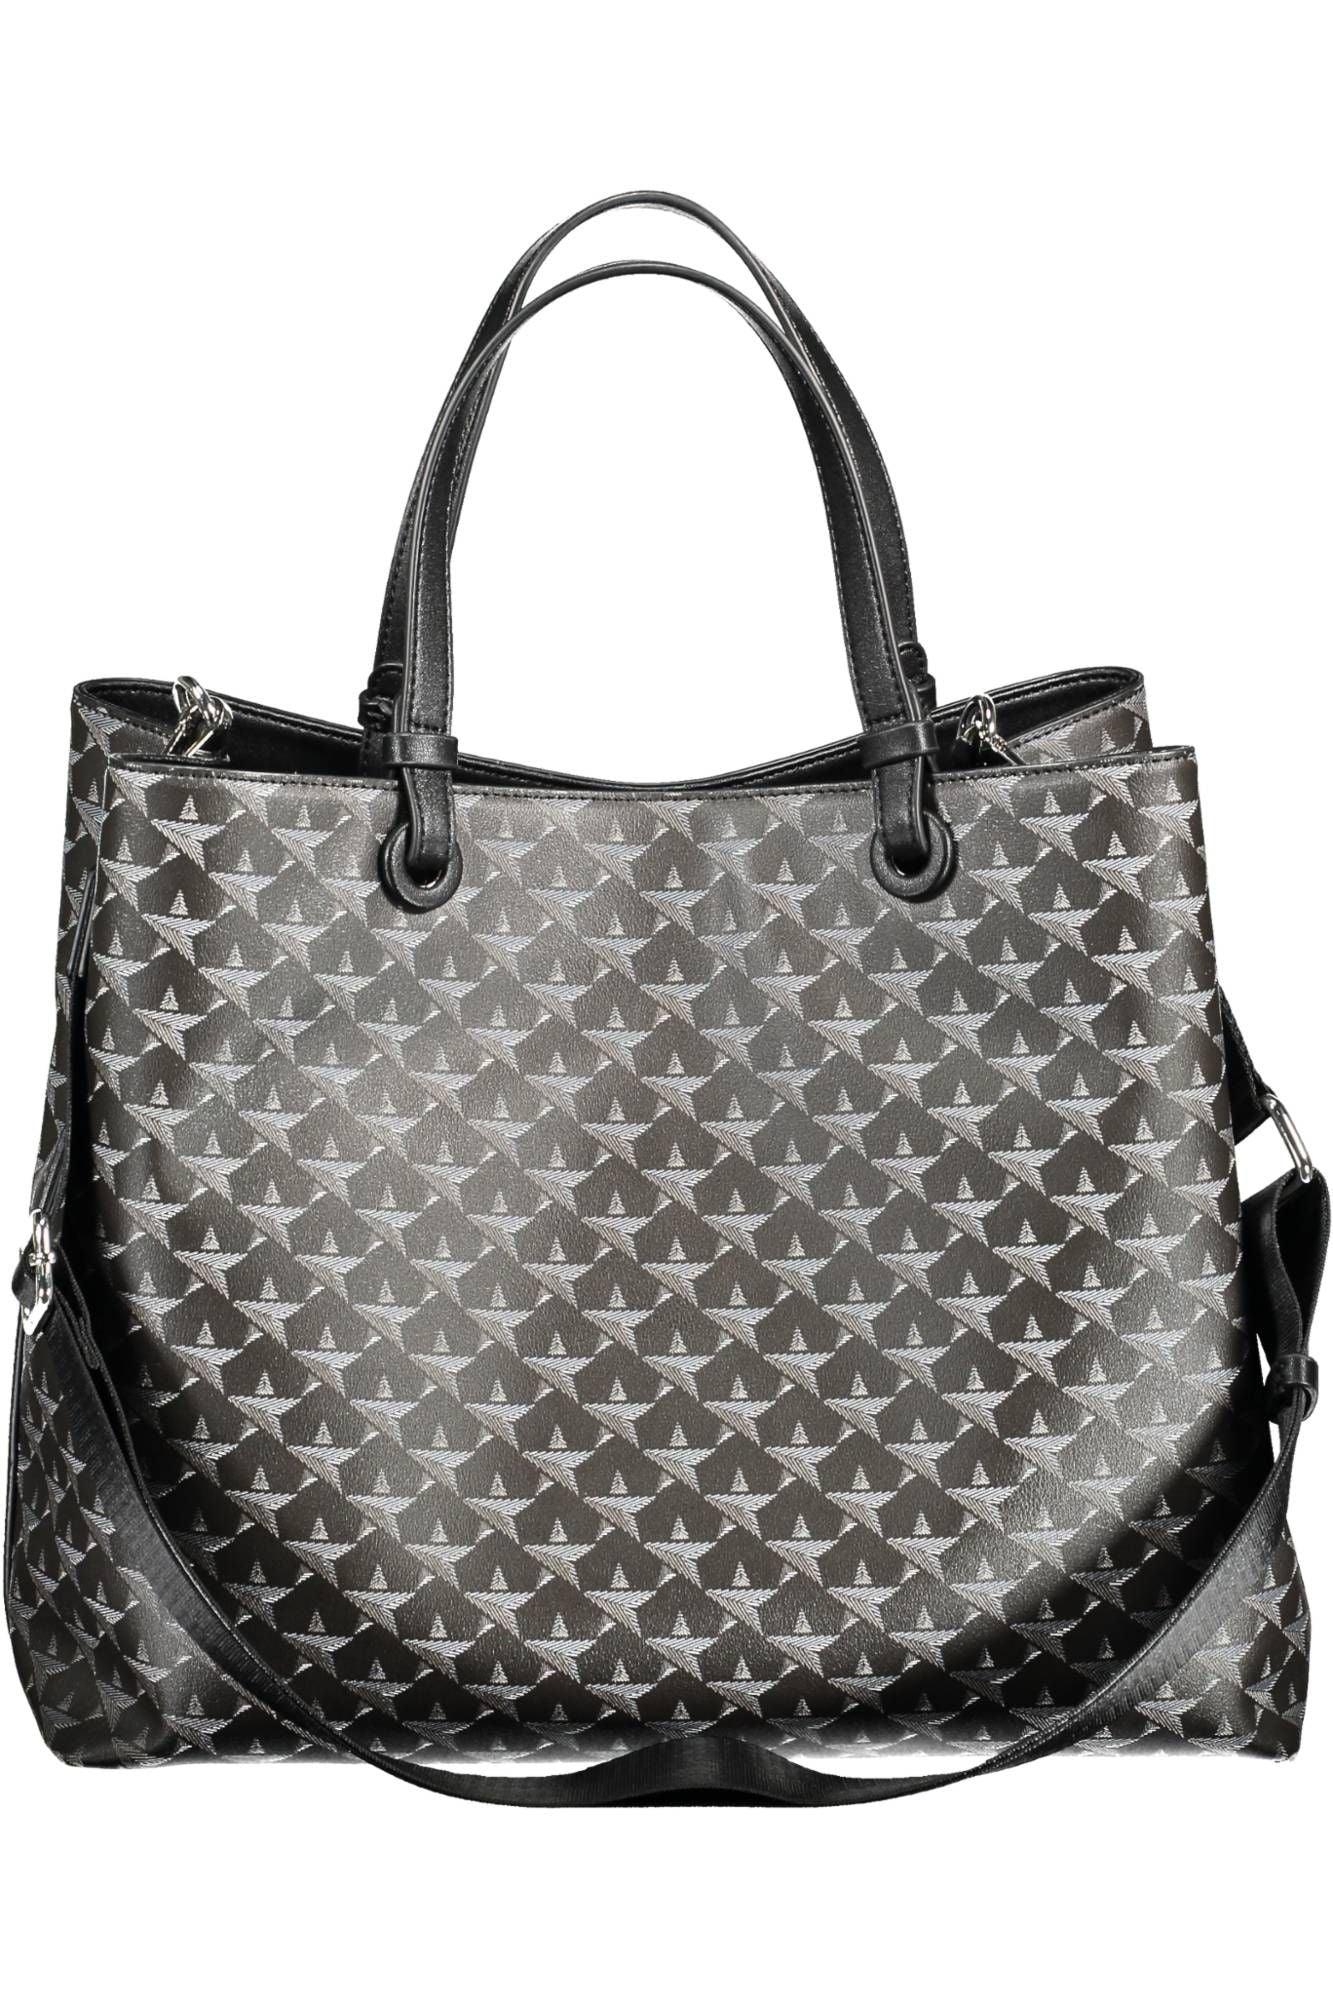 BYBLOS Chic Black Two-Handle Bag with Contrasting Details - PER.FASHION